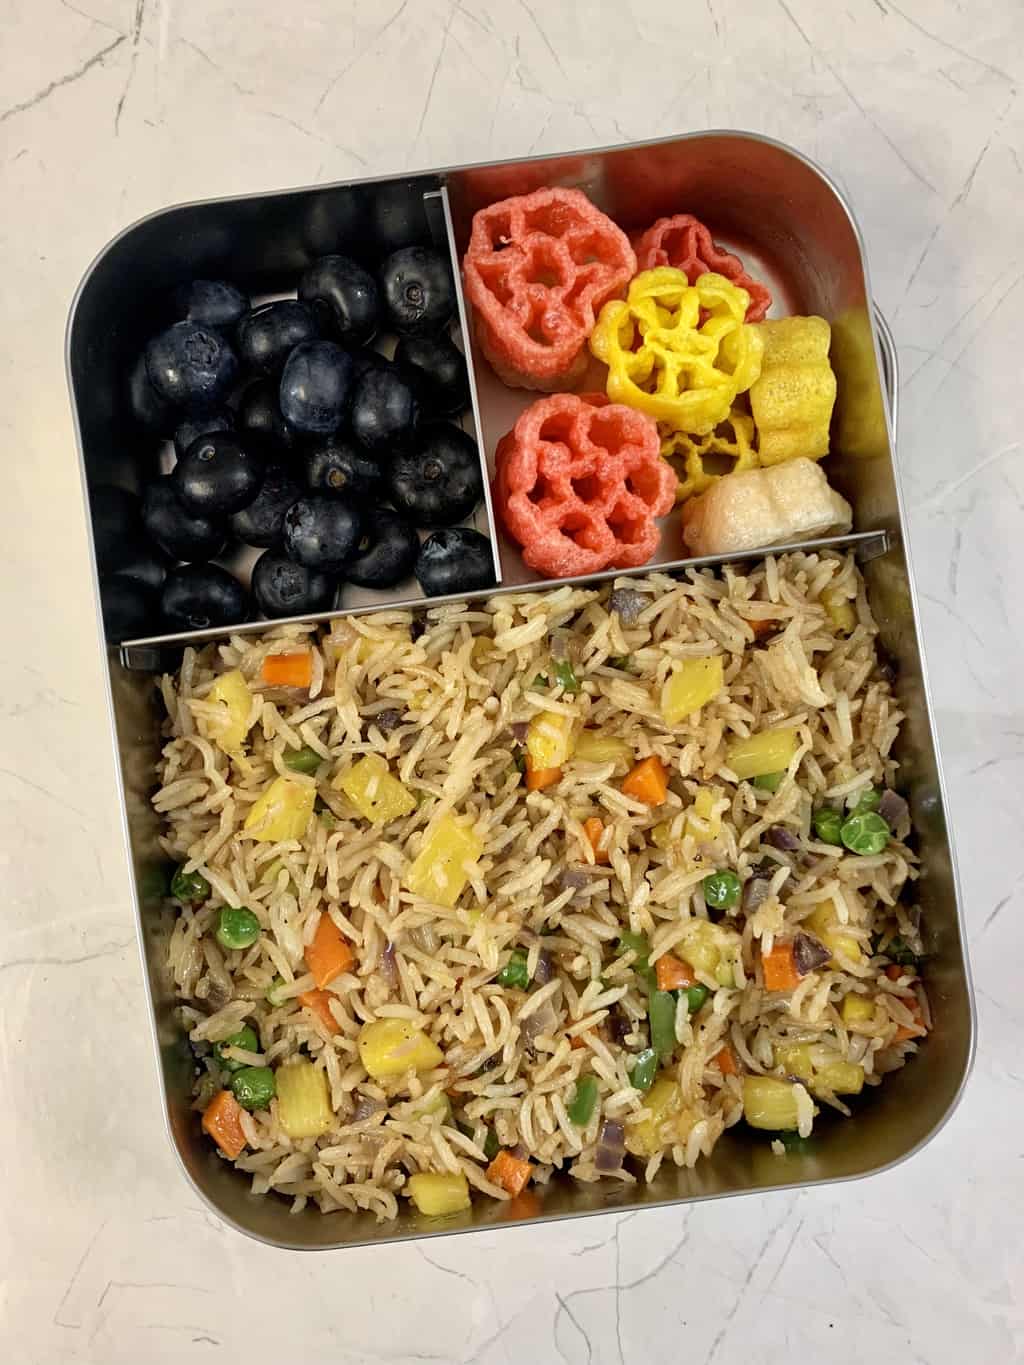 Pineapple Fried Rice+Fryums+Blueberries|sweet-spicy fried rice made with pineapple & veggies which is both colorful and flavorful|indianveggiedelight.com